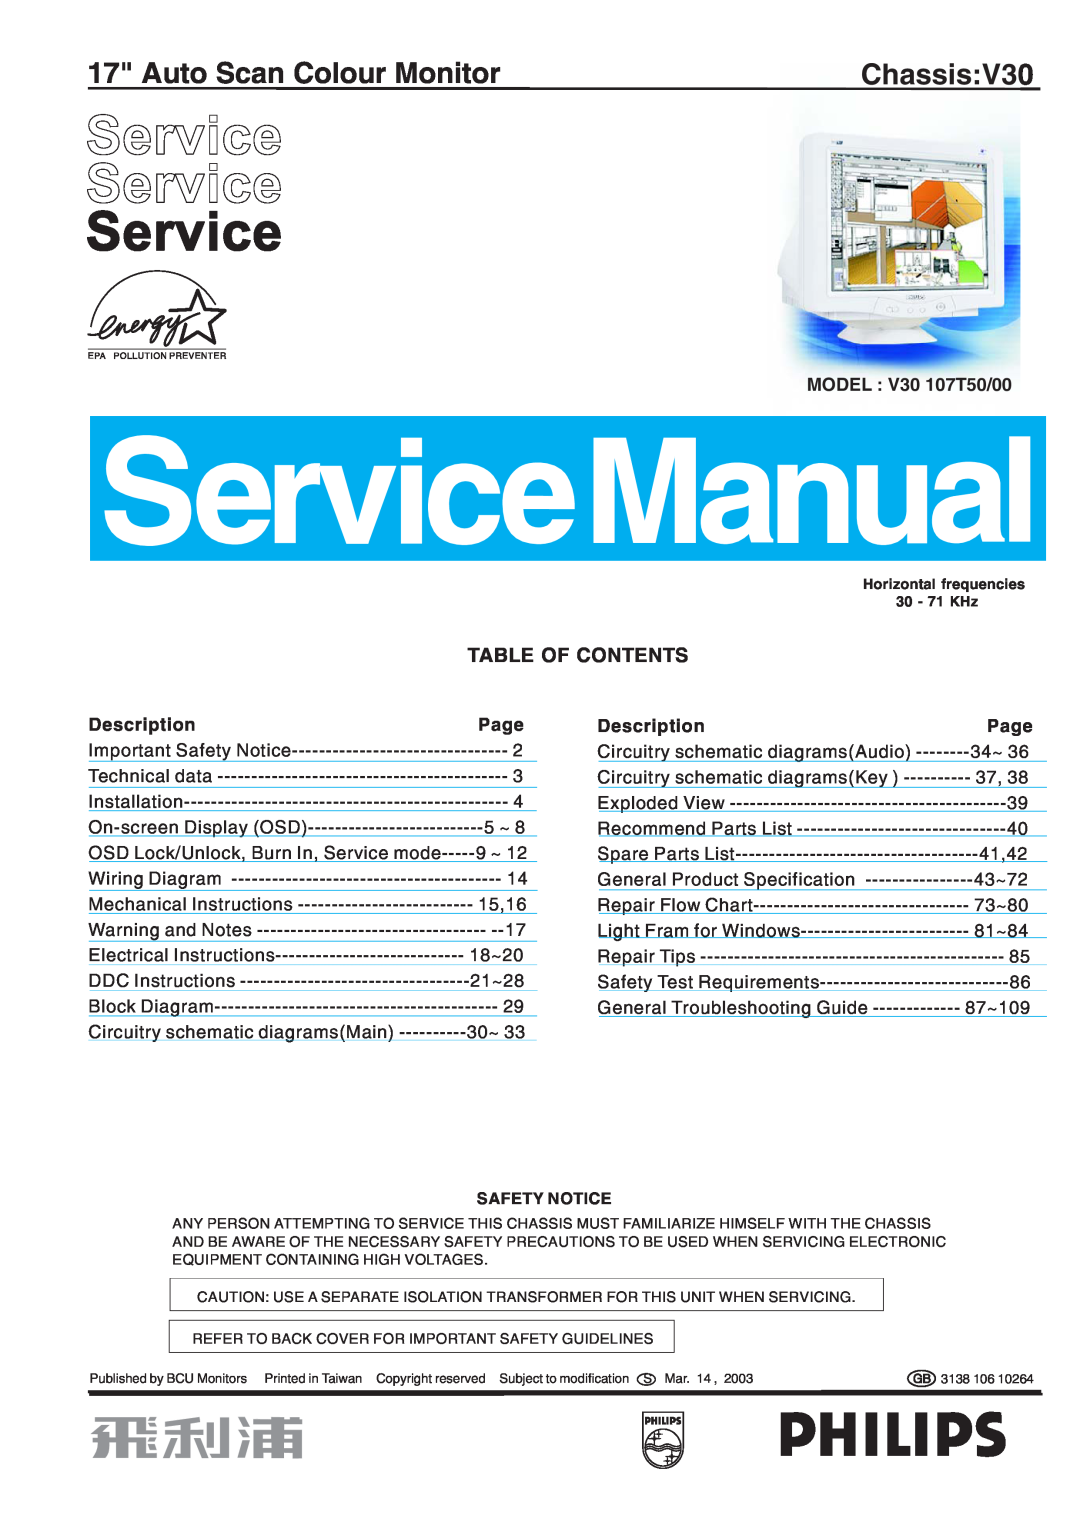 Philips manual Service Service Service, Auto Scan Colour Monitor, ChassisV30, Table Of Contents 